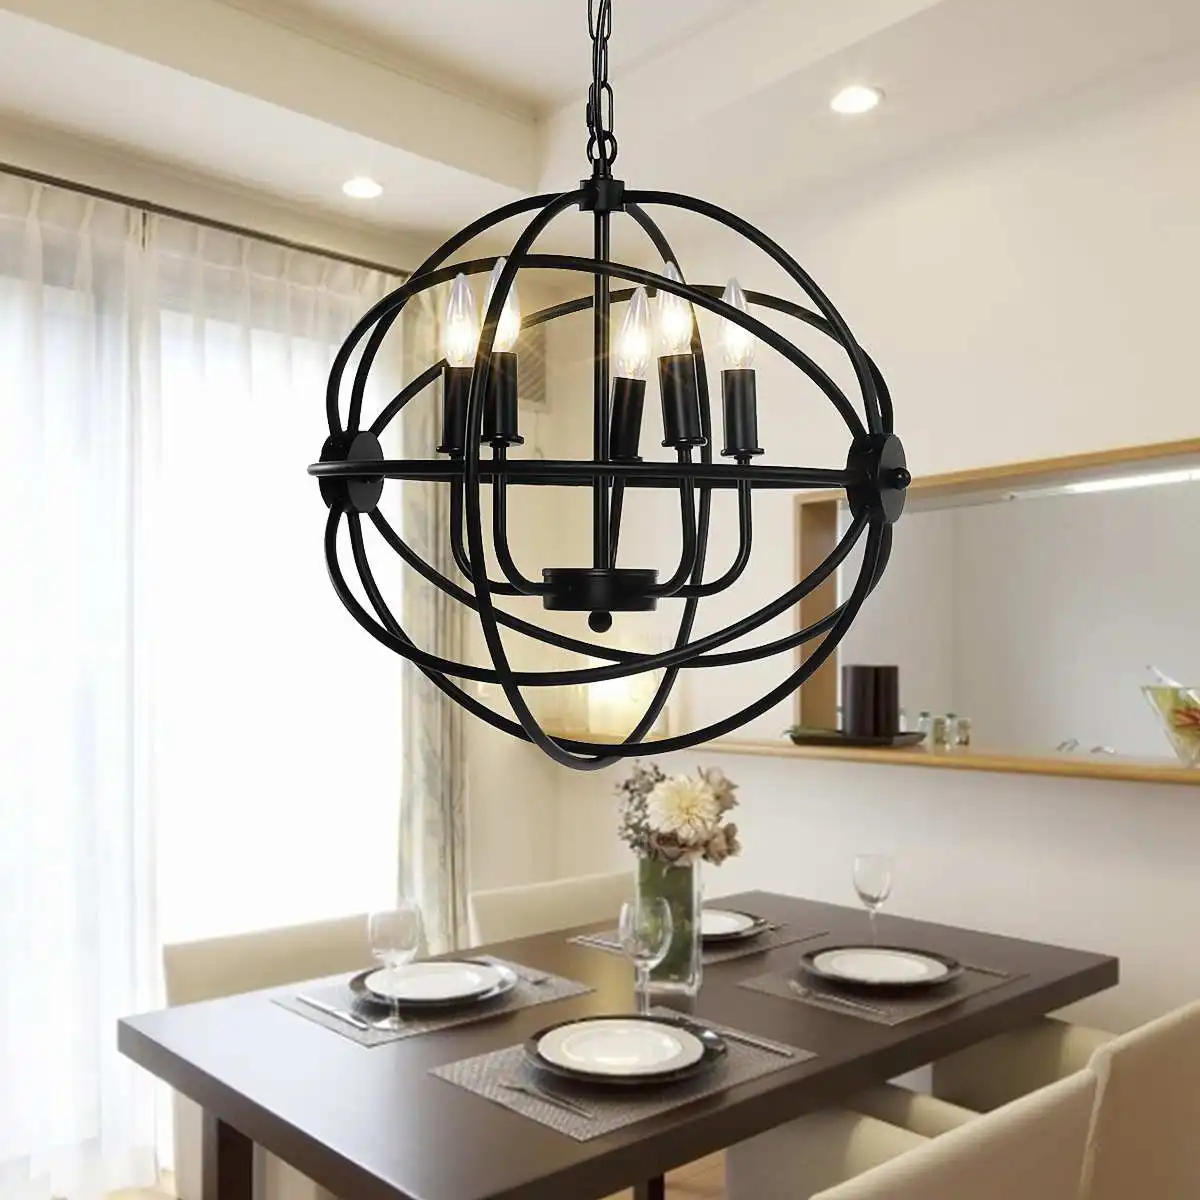 Antique Style Industrial Vintage Light Ceiling Chandelier 5 Lights Decorative Luminaire Metal Hanging Lamps for Ceiling